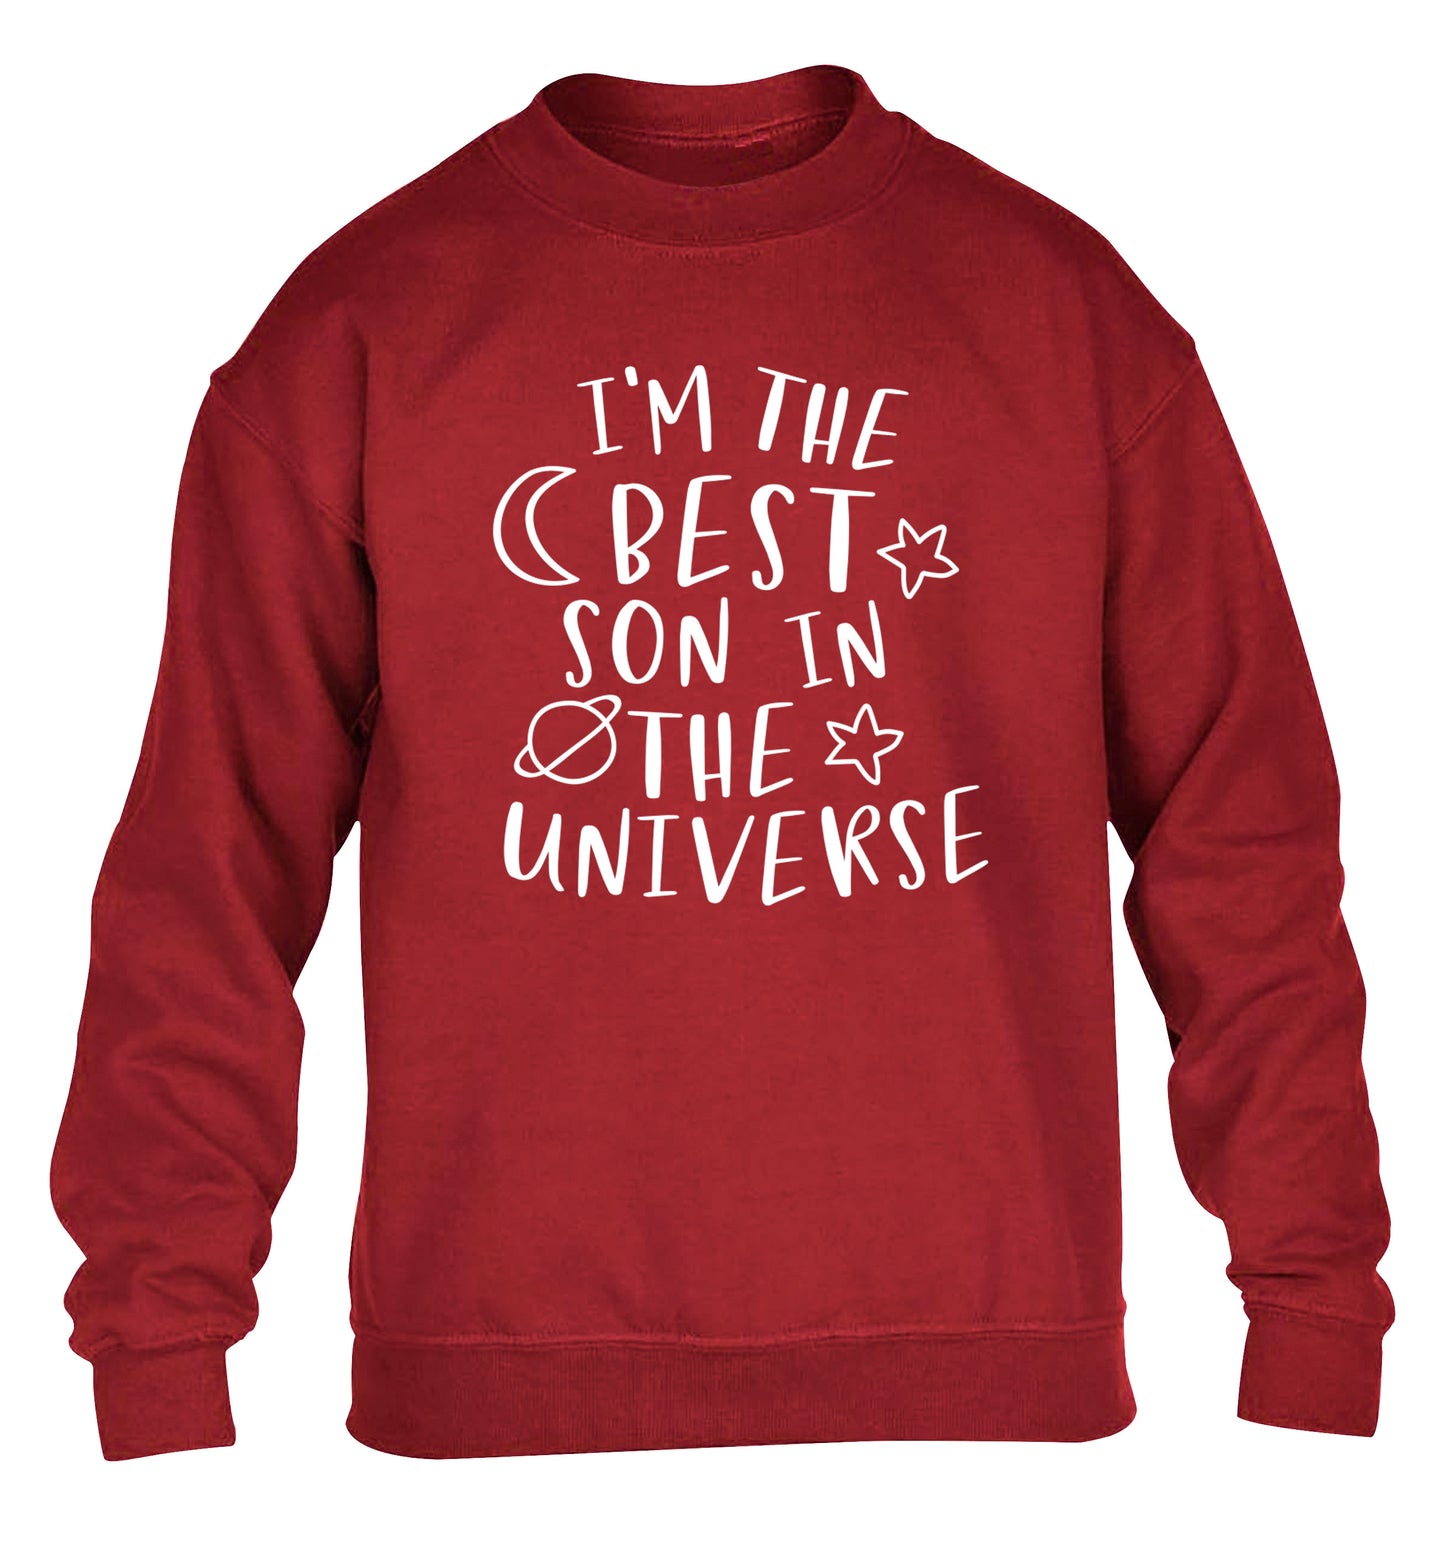 I'm the best son in the universe children's grey sweater 12-13 Years